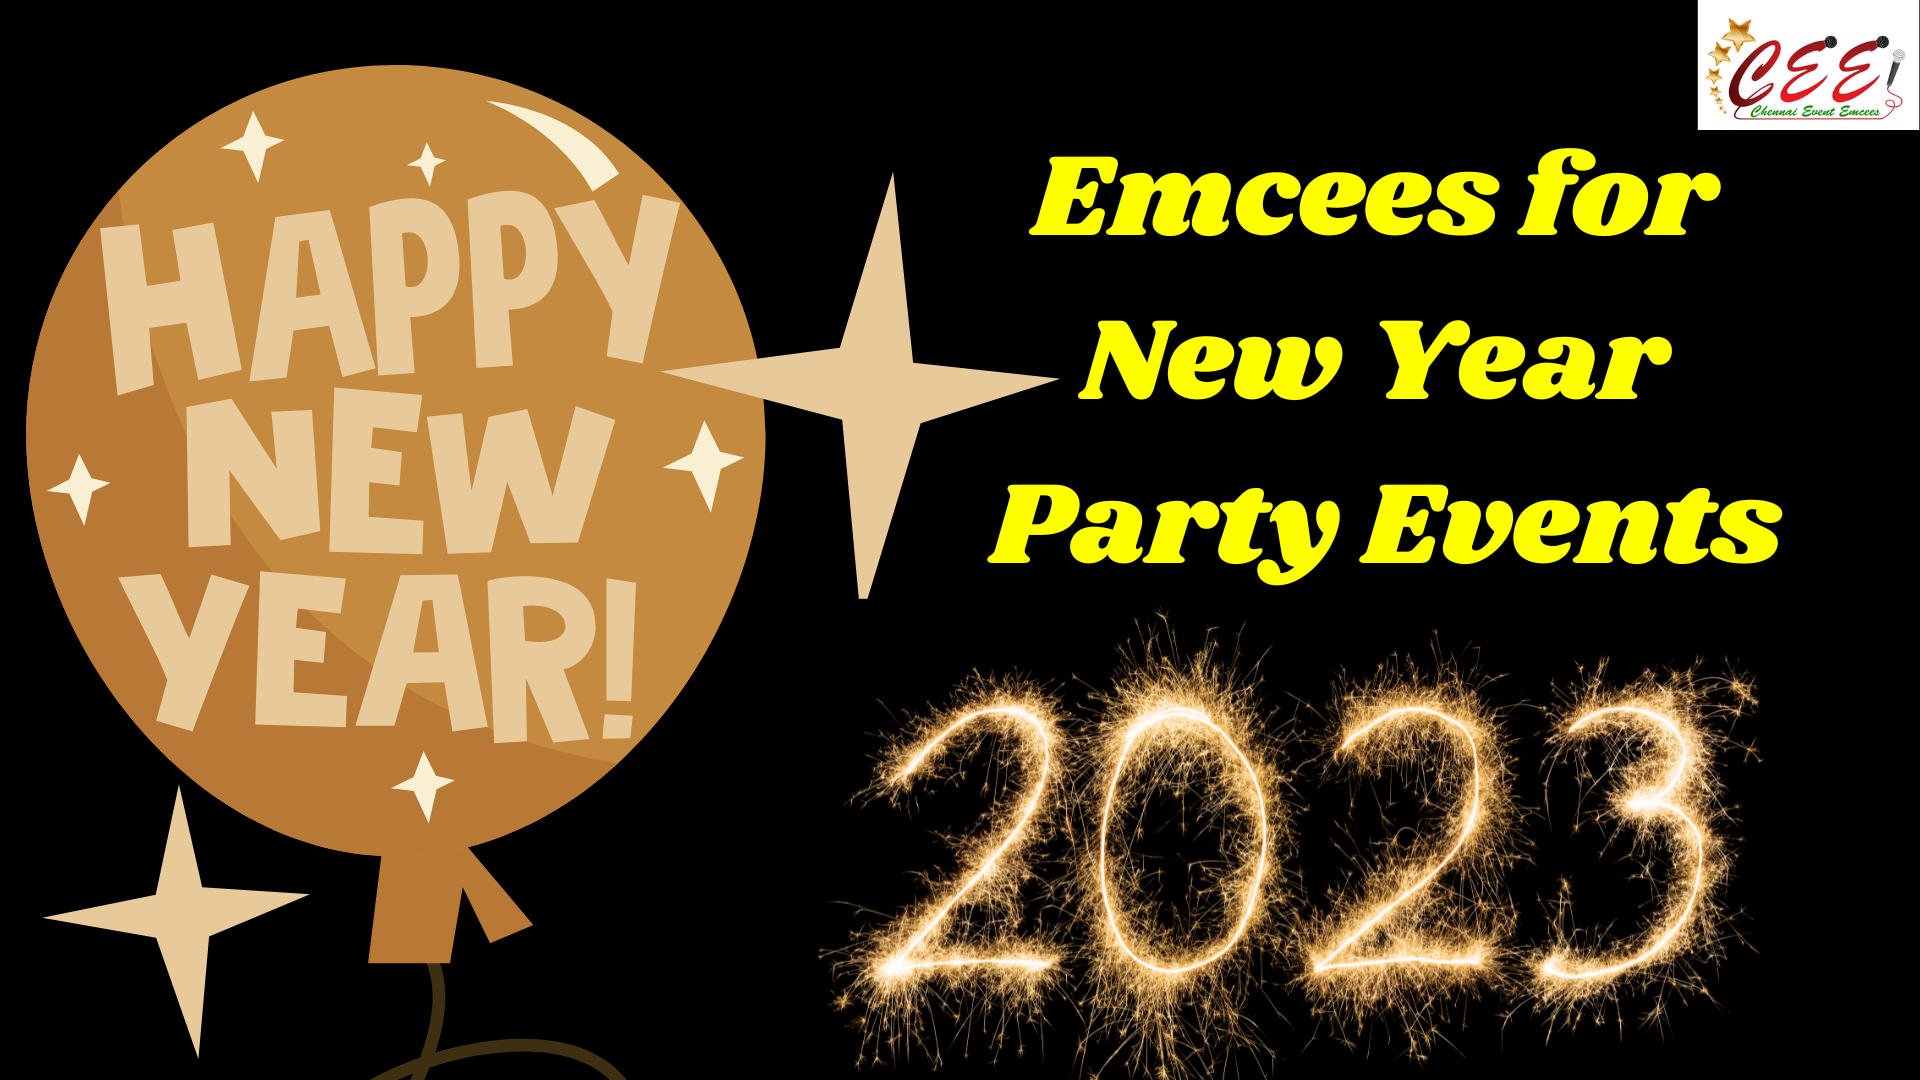 Anchors for New Year Party Events 2023 in Chennai and Pondicherry